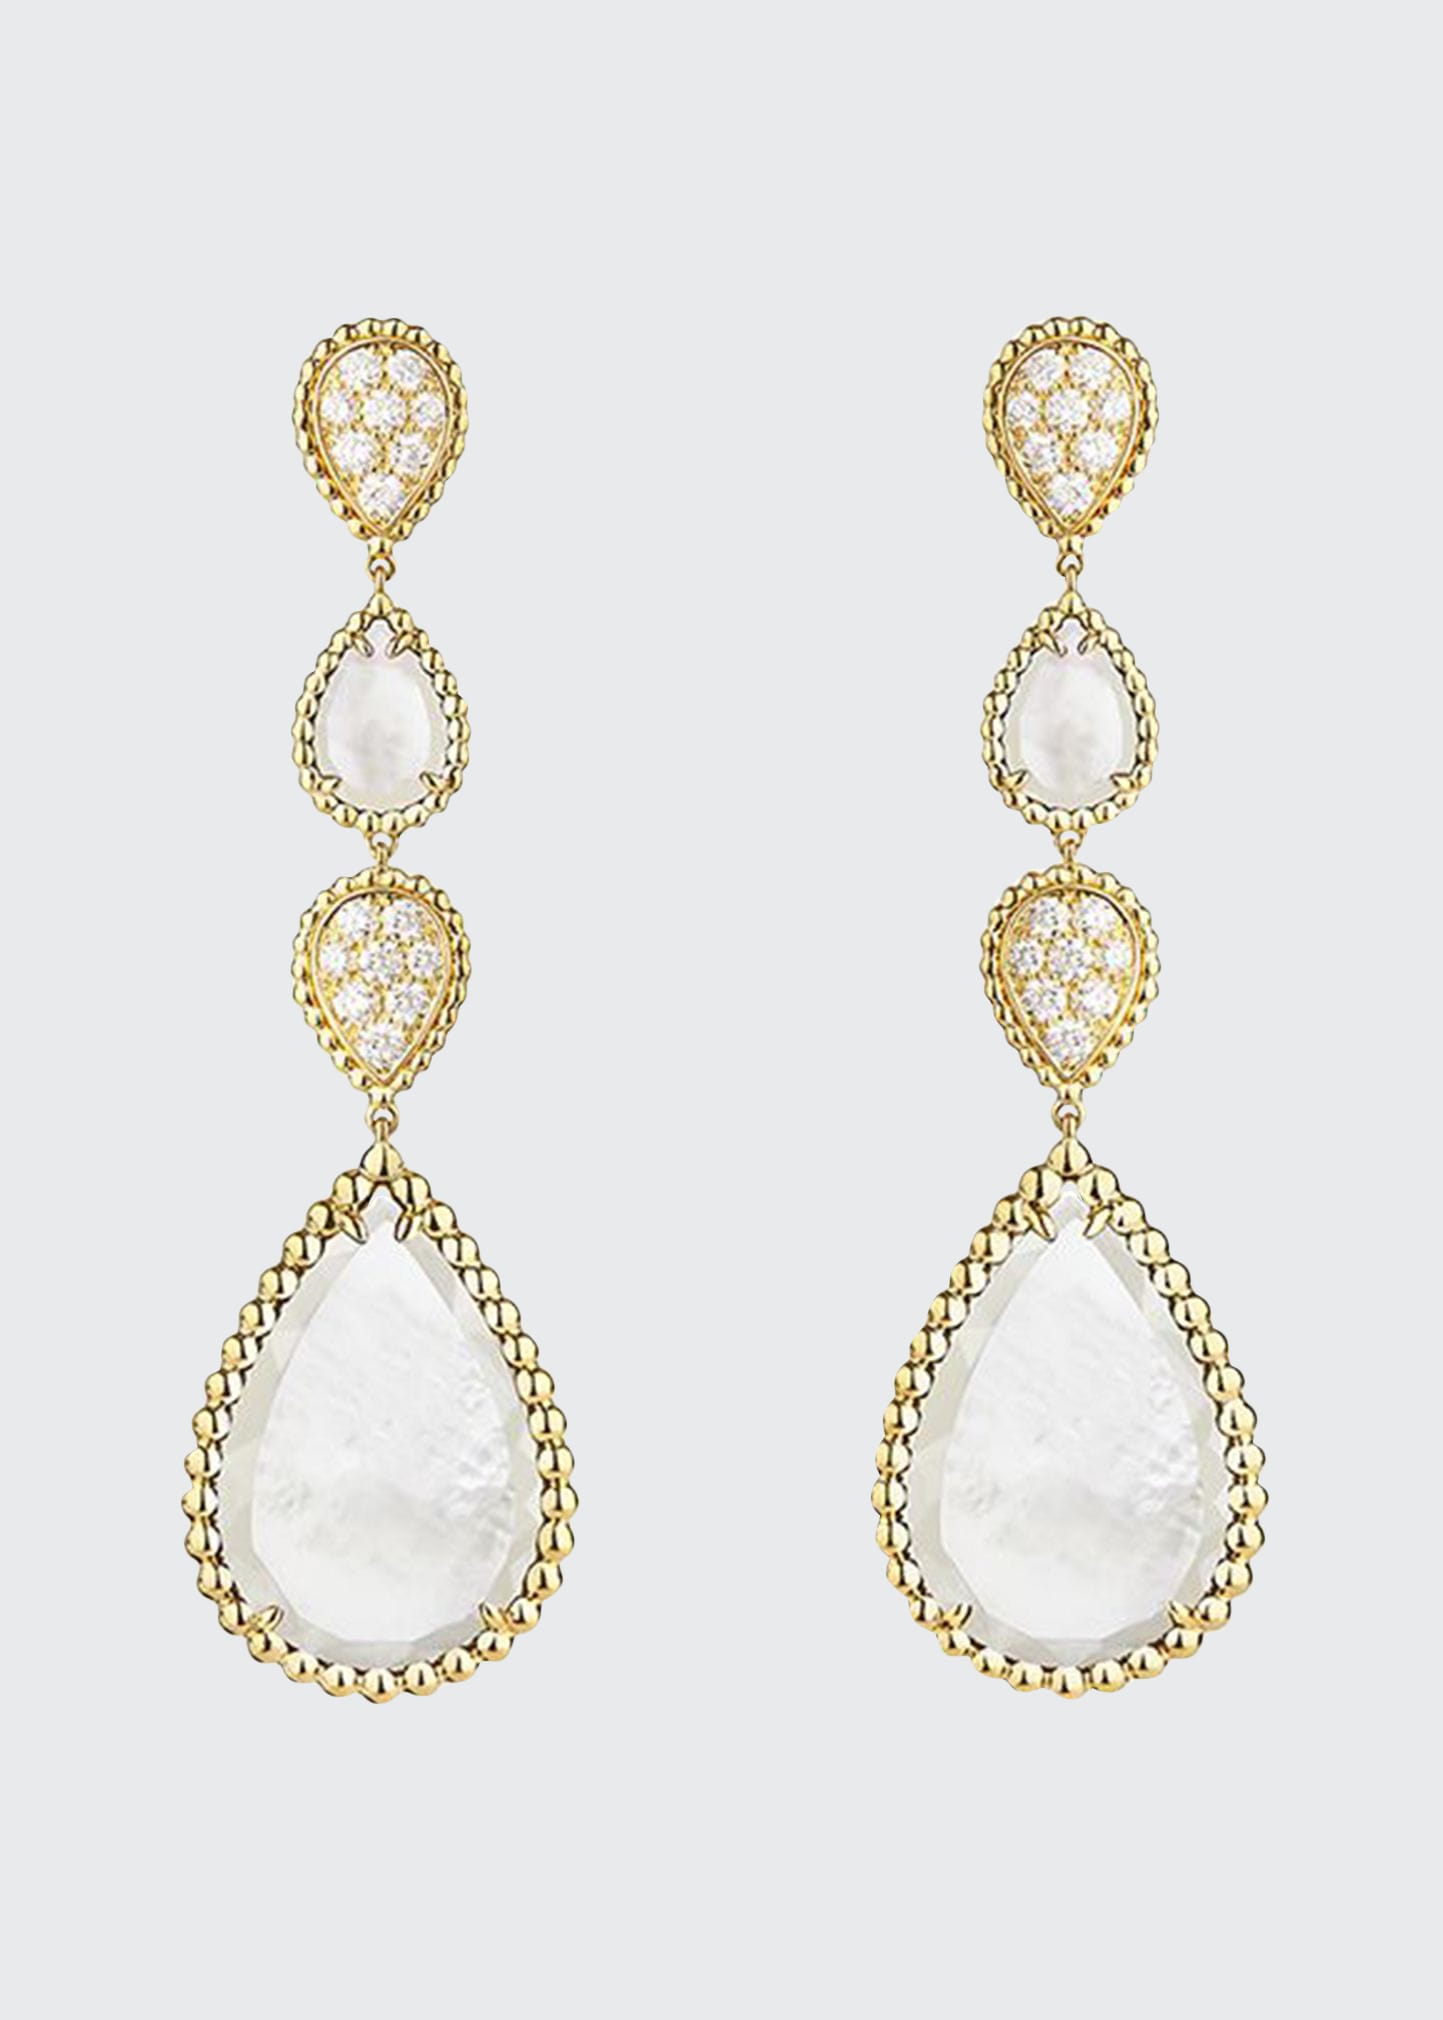 Boucheron Serpent Boheme Diamond and Mother-of-Pearl Earrings in Yellow Gold